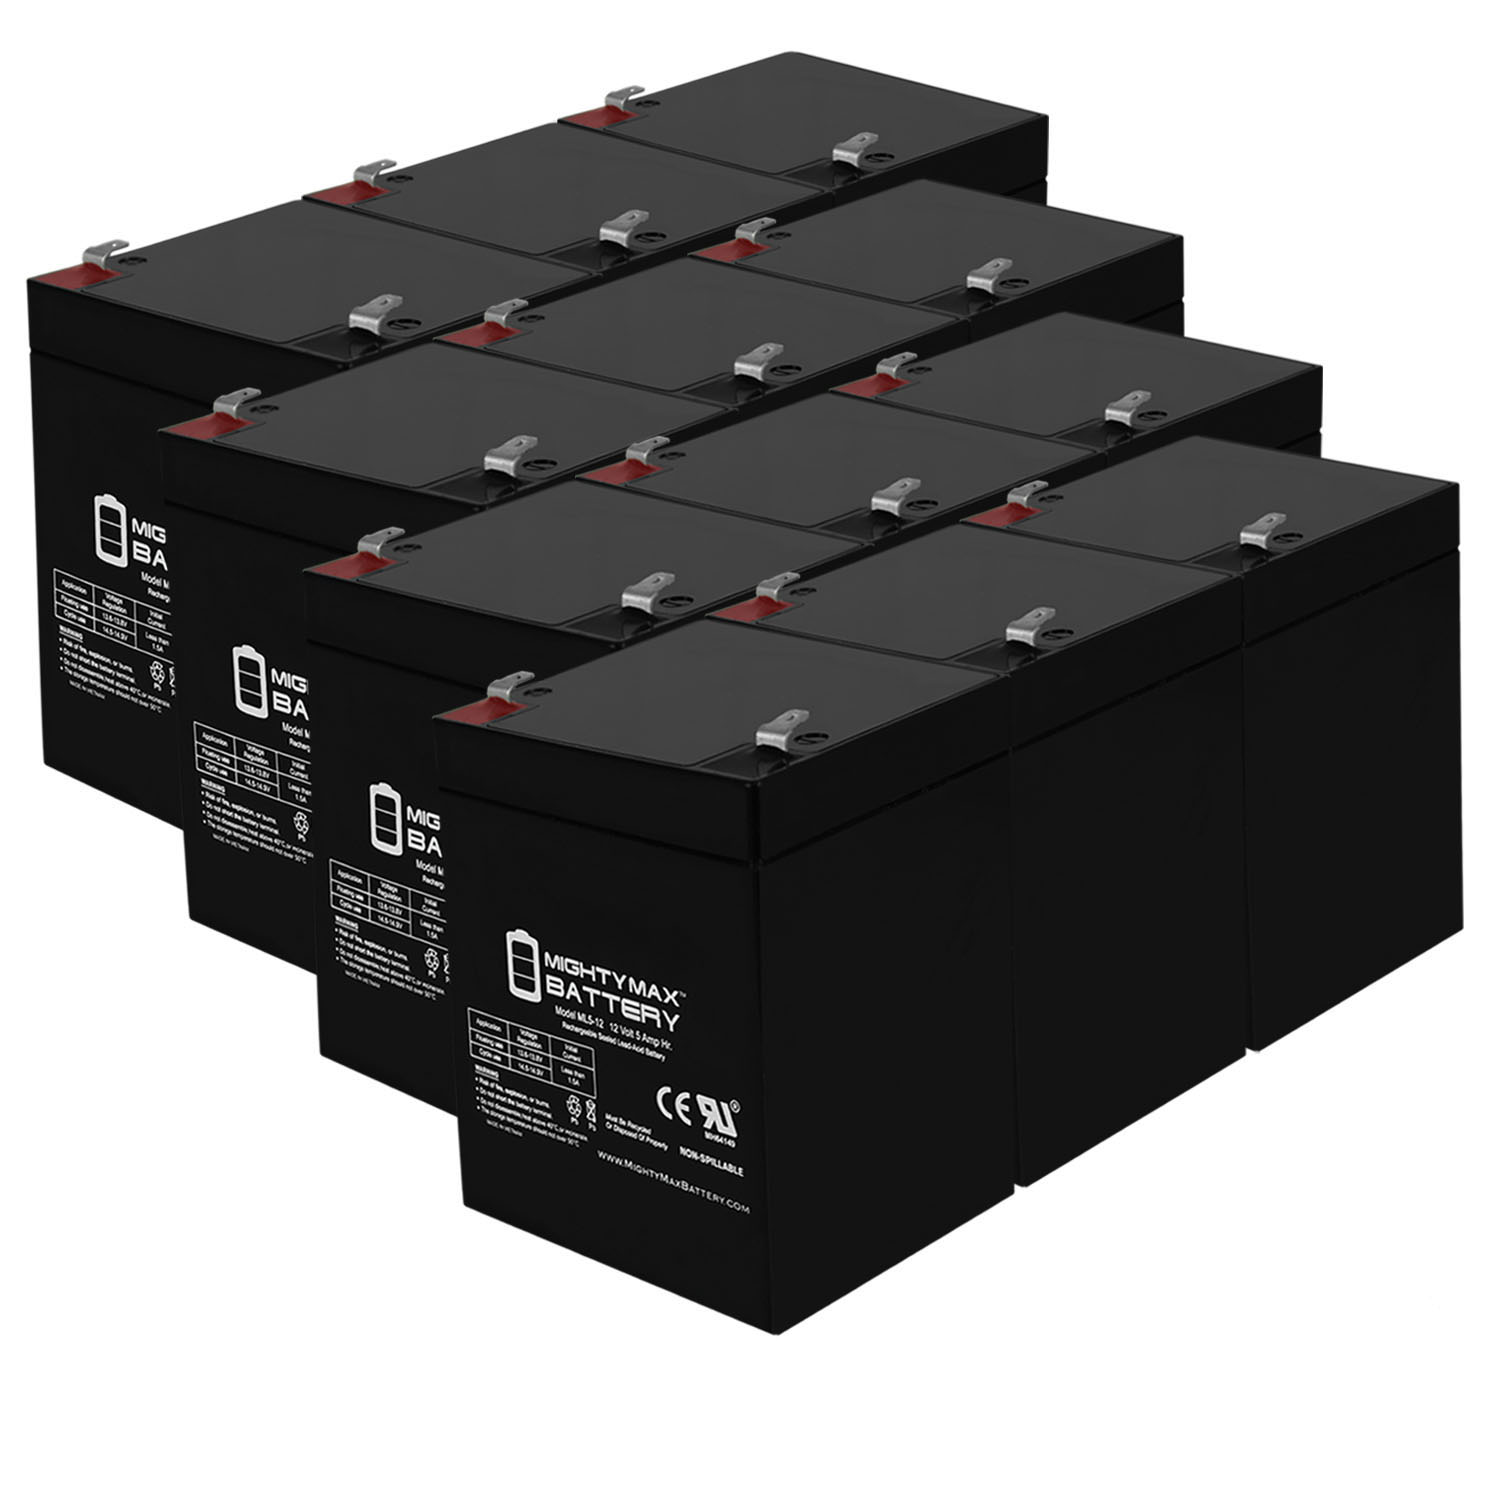 12V 5AH SLA Replacement Battery for Universal Power UB1250 - 12 Pack